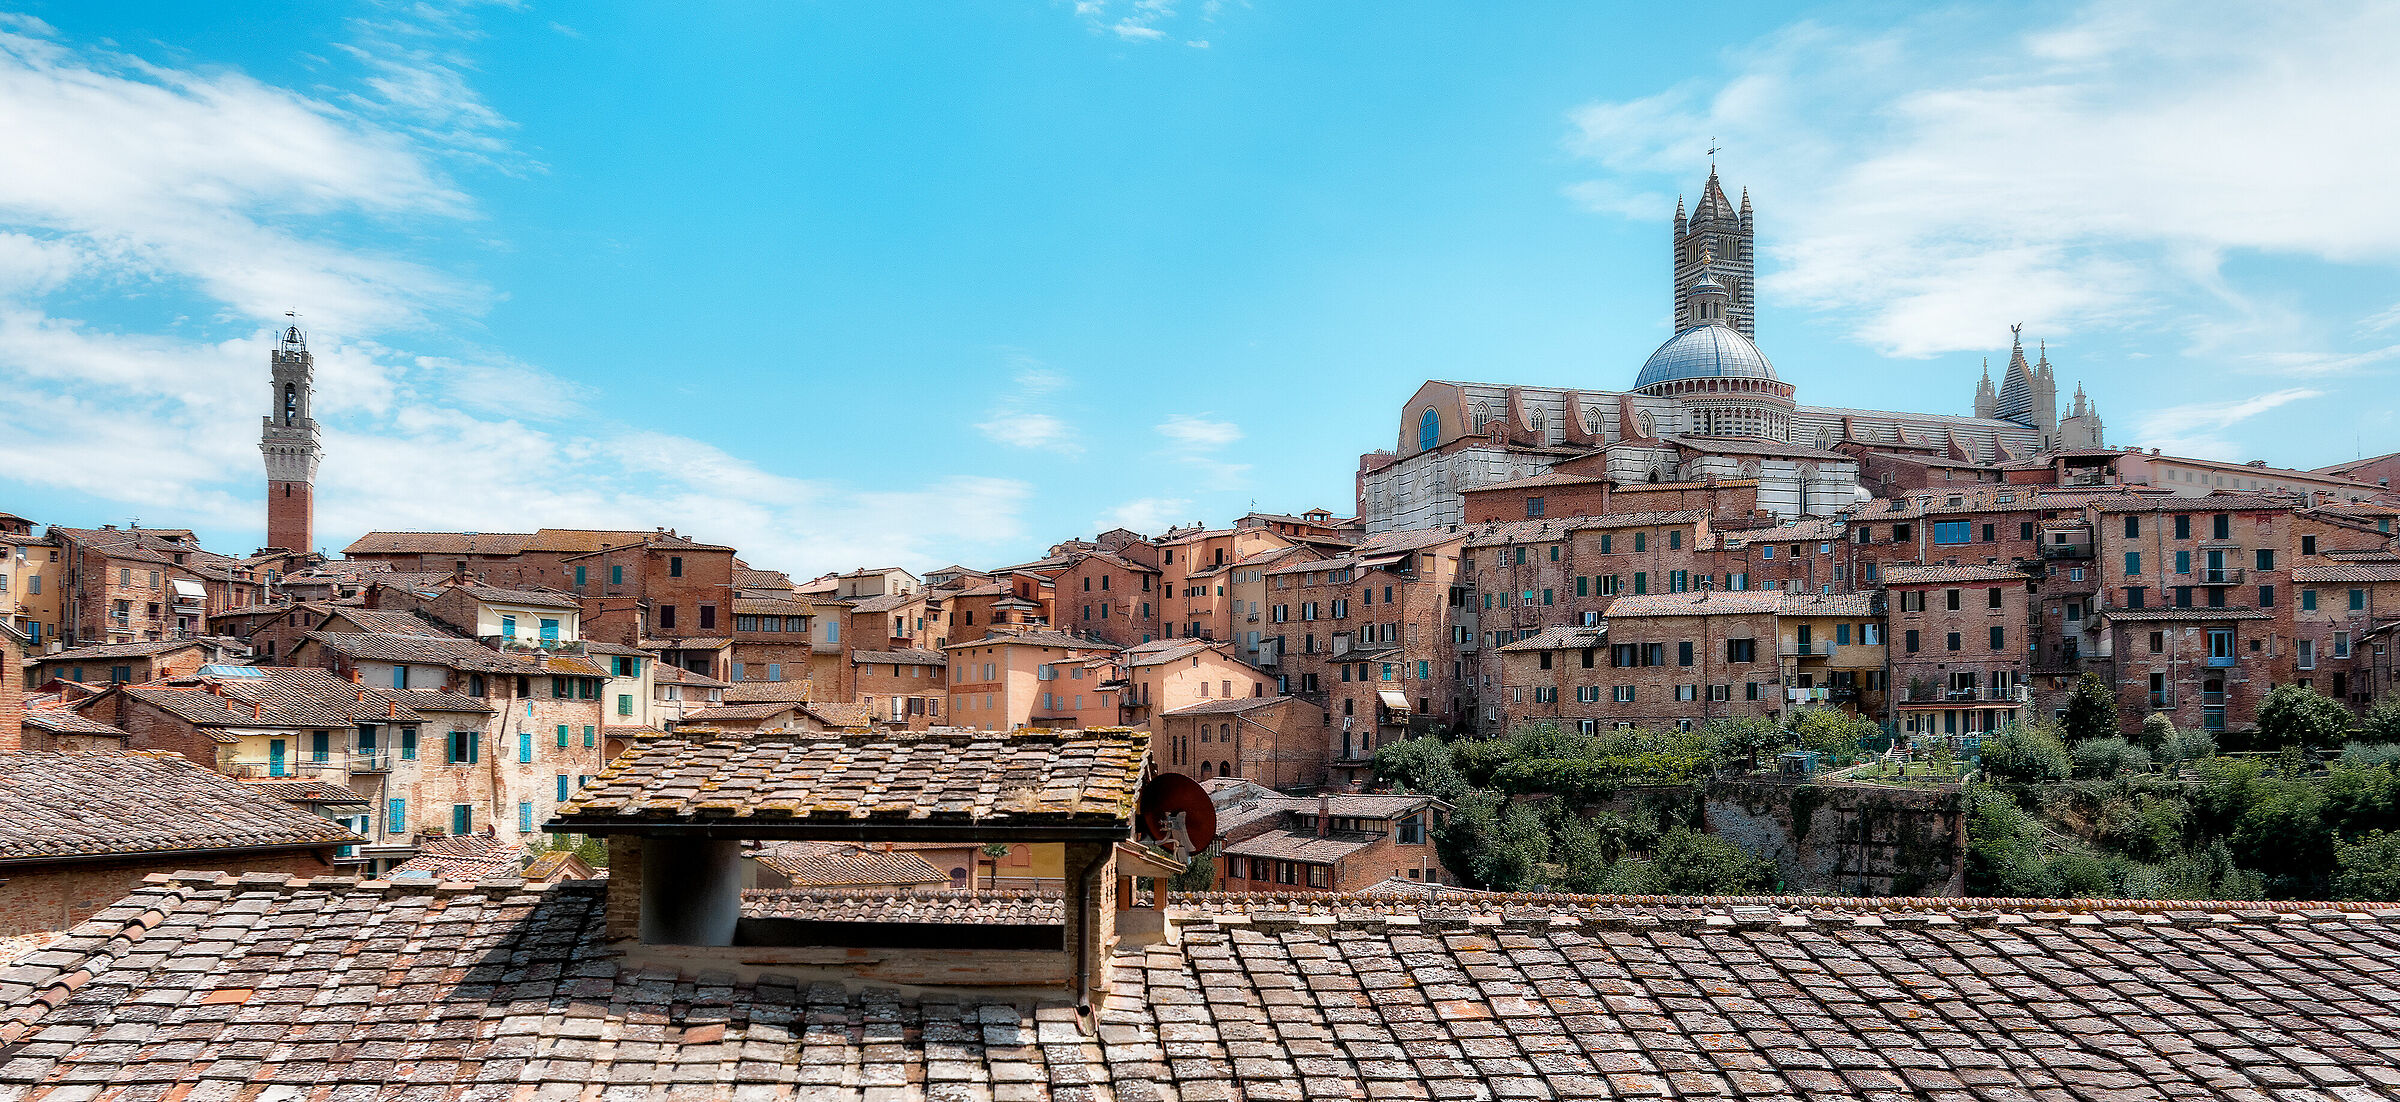 Siena from the Roof...